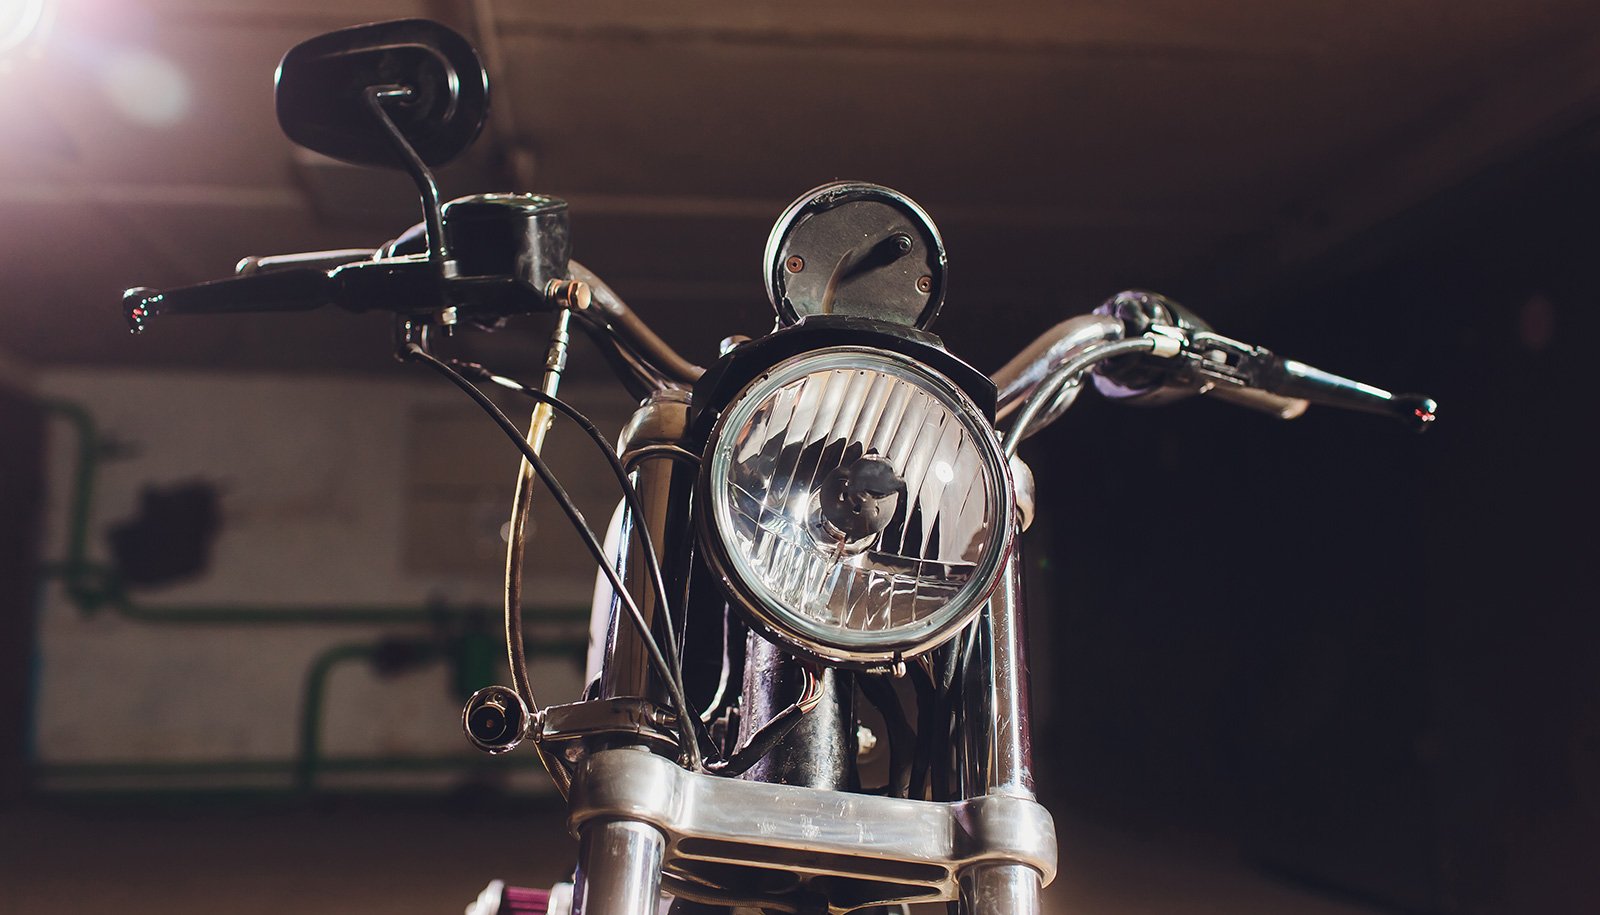 How to Prep A Motorcycle for Winter Storage